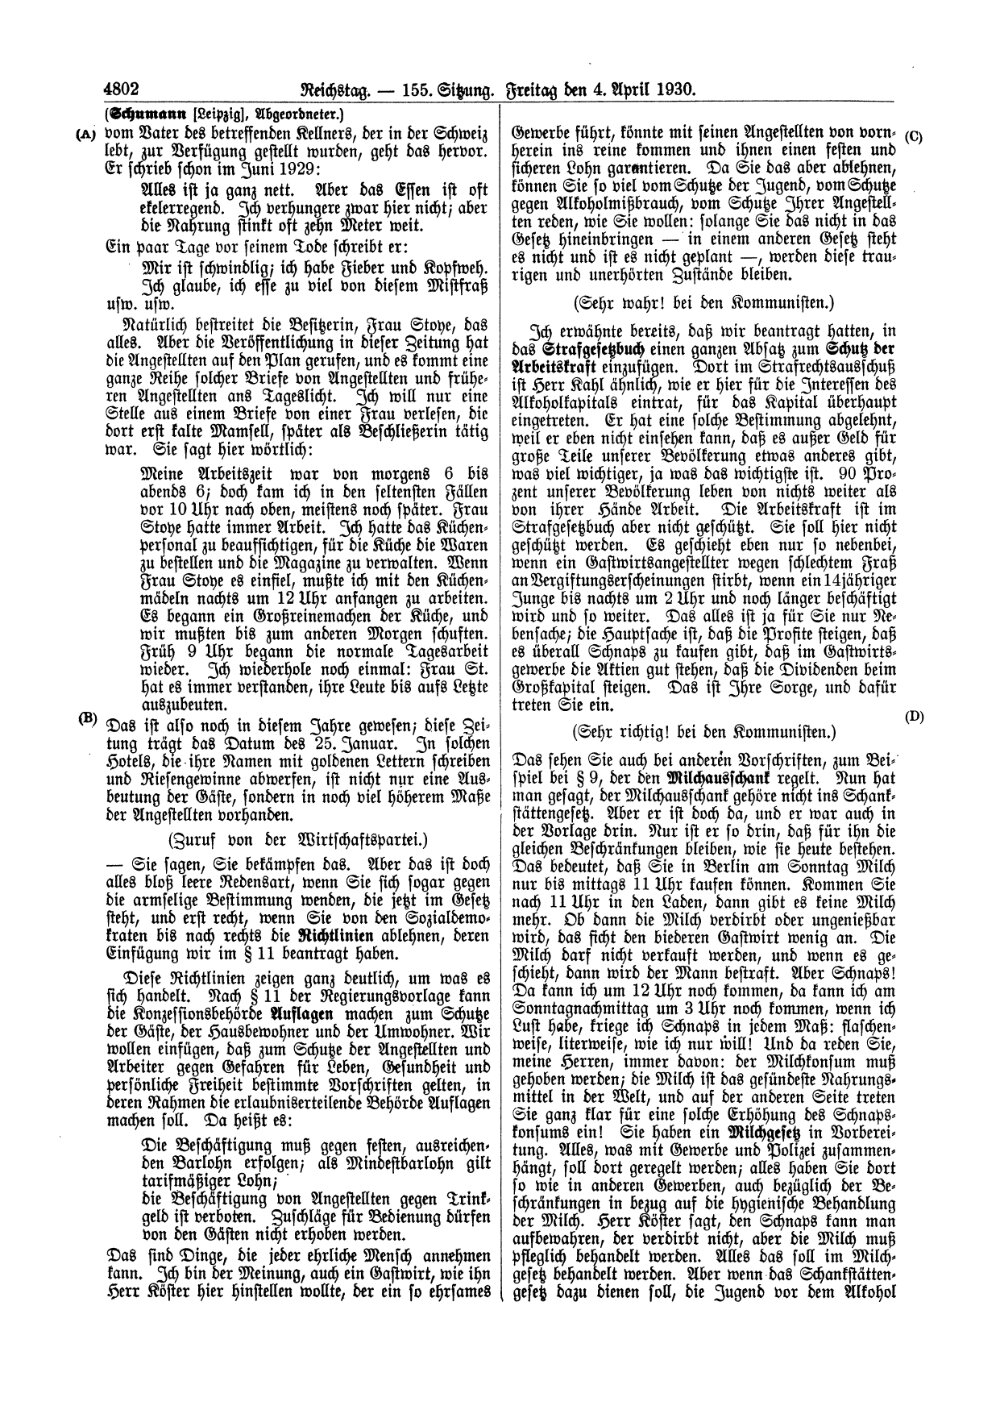 Scan of page 4802